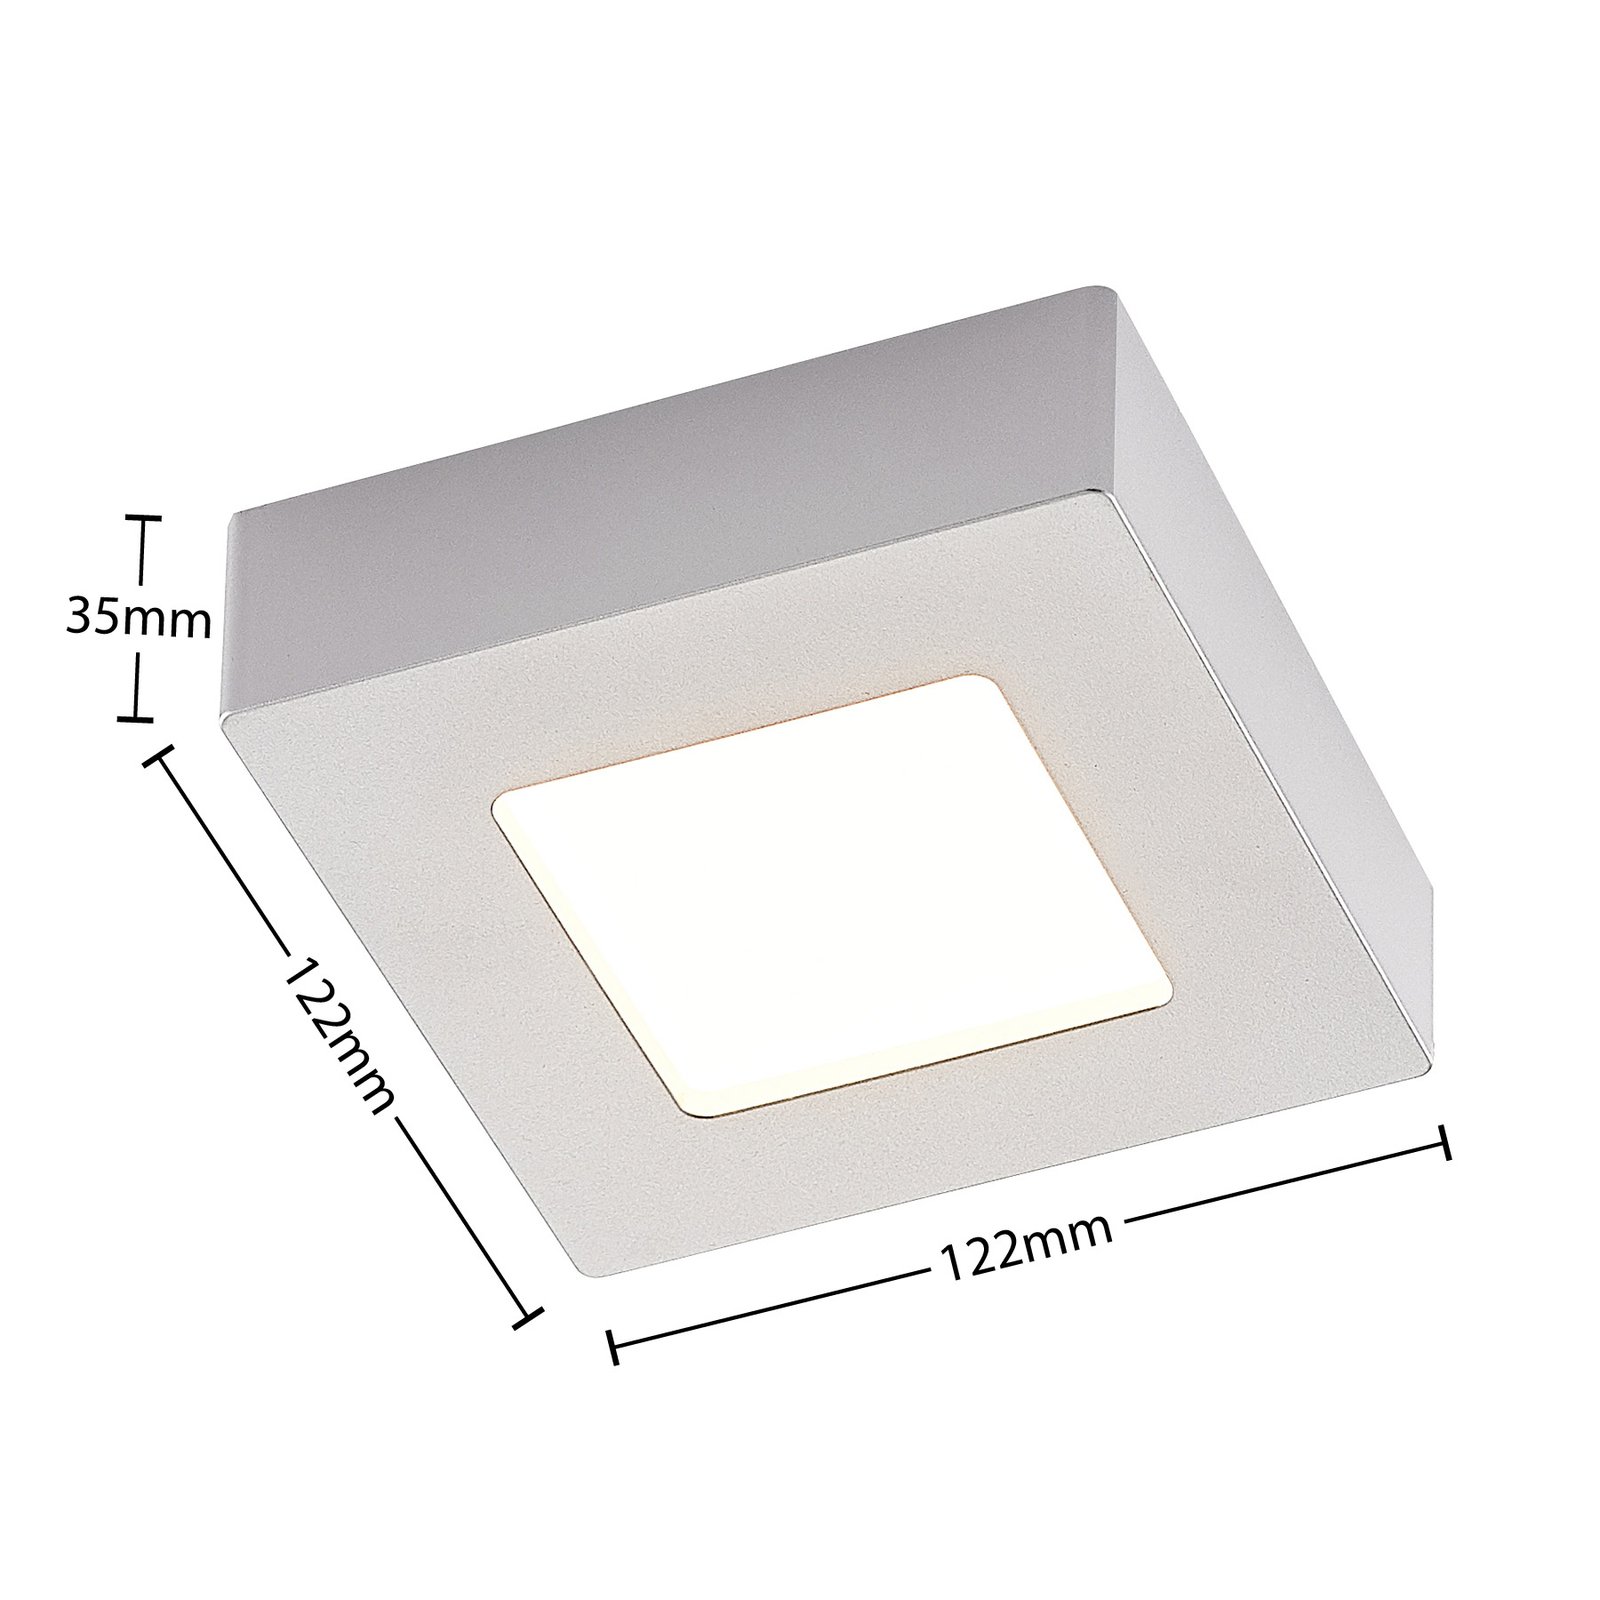 Prios LED ceiling light Alette, silver, 12.2 cm, dimmable